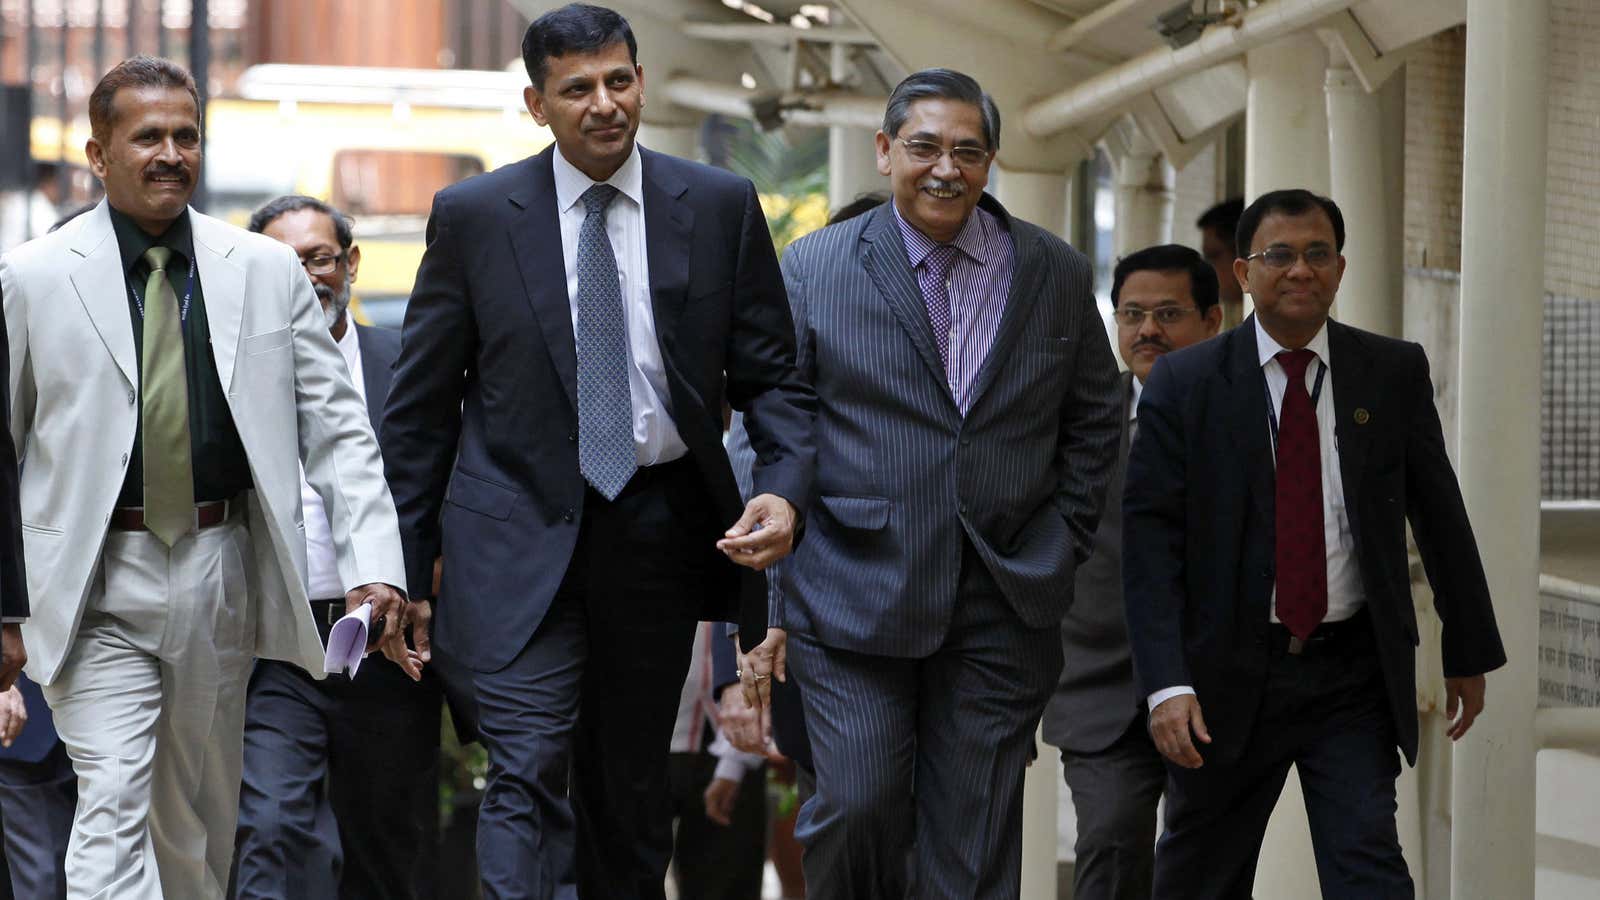 India’s new central banker Raghuram Rajan, second from left, is doing what he can. But the government needs to step up to restore investors’ confidence too.